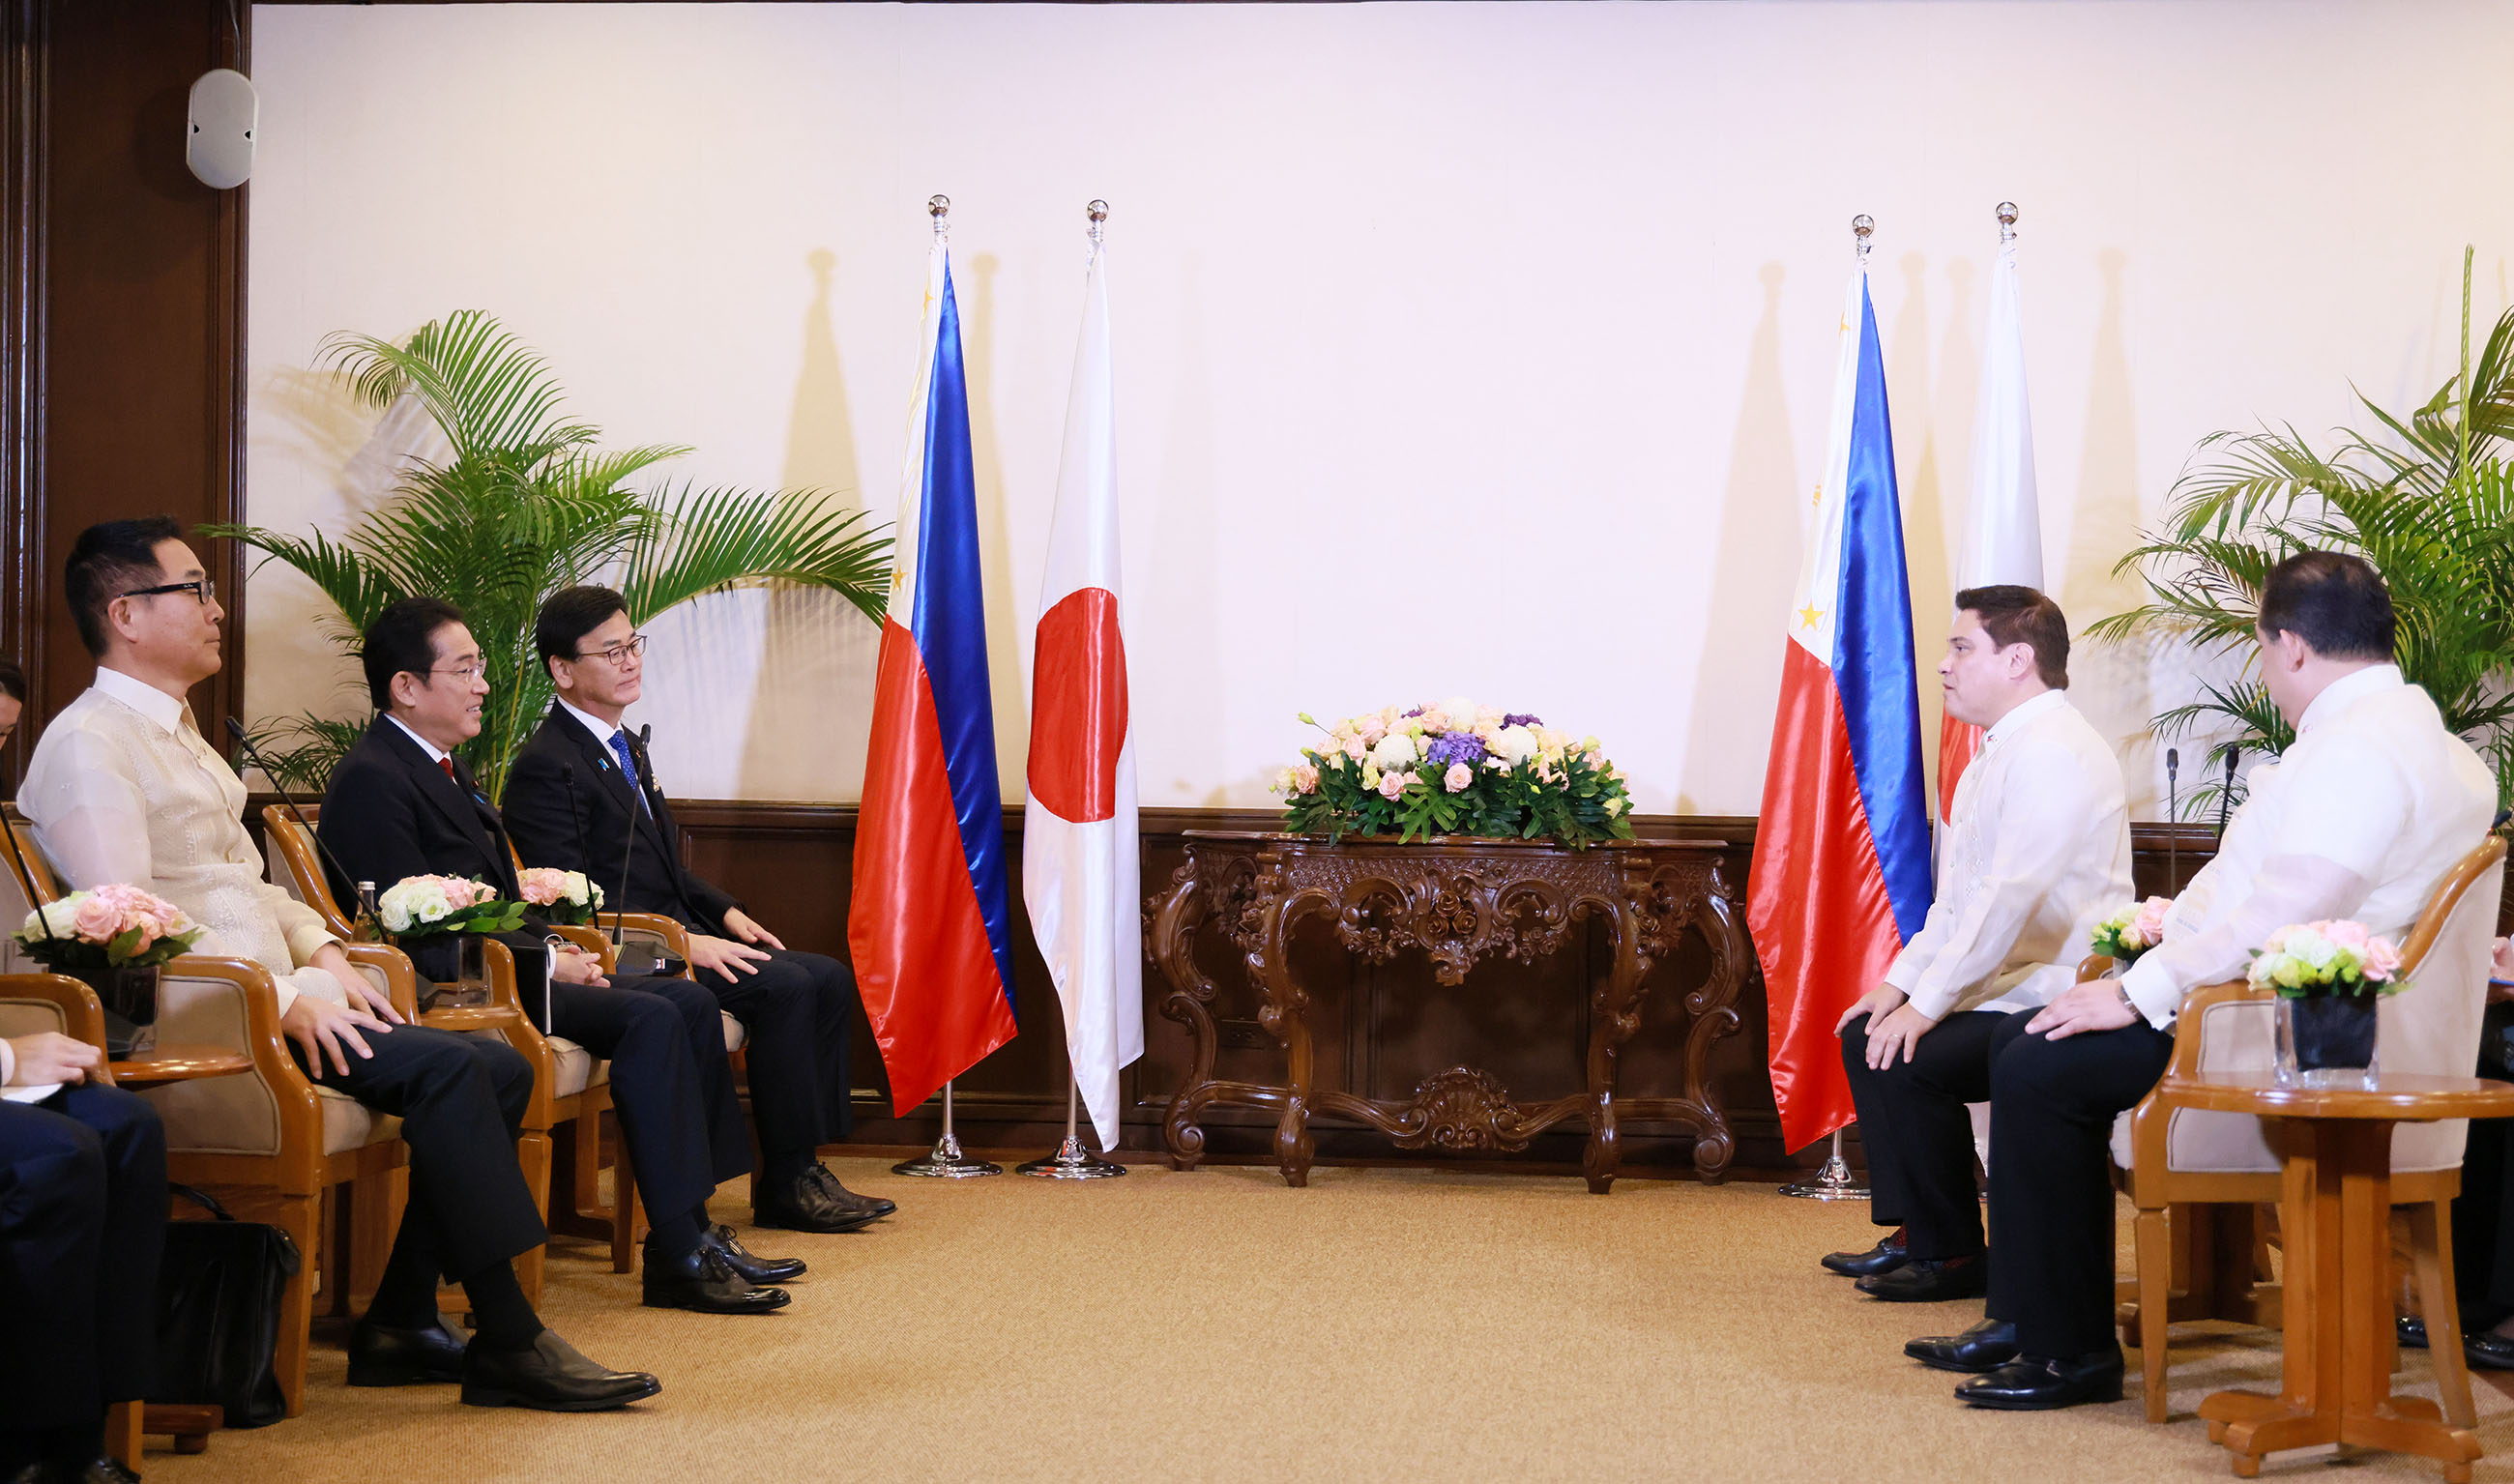 Prime Minister Kishida speaking with the President of the Senate and Speaker of the House of Representatives